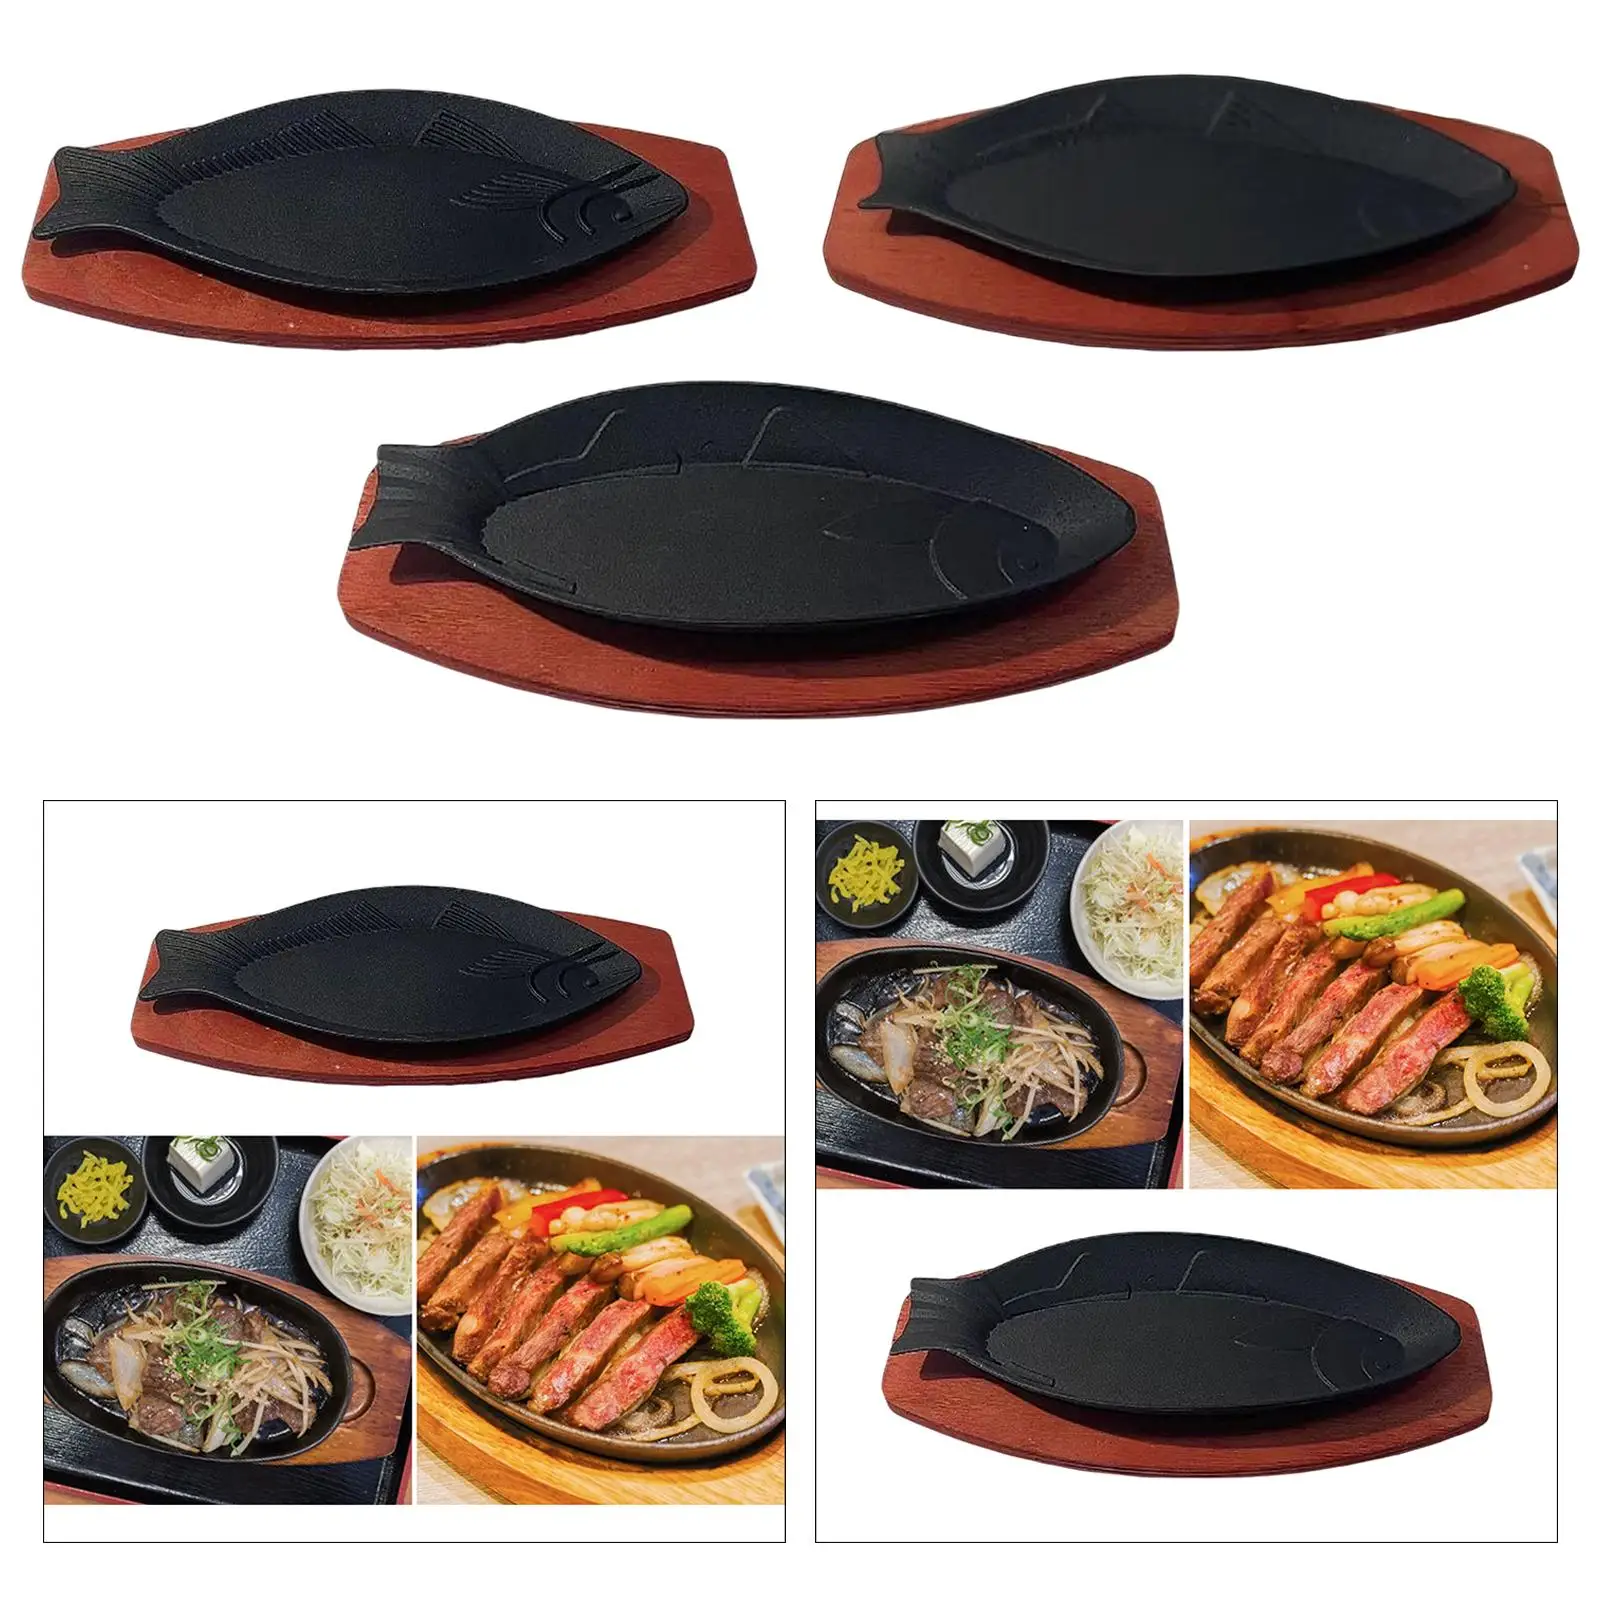 Fish Shaped Grilling Pan with Wooden Base Serving Pan Fryer Baking Tools Cast steak Frying Pan for Picnics Restaurants BBQ